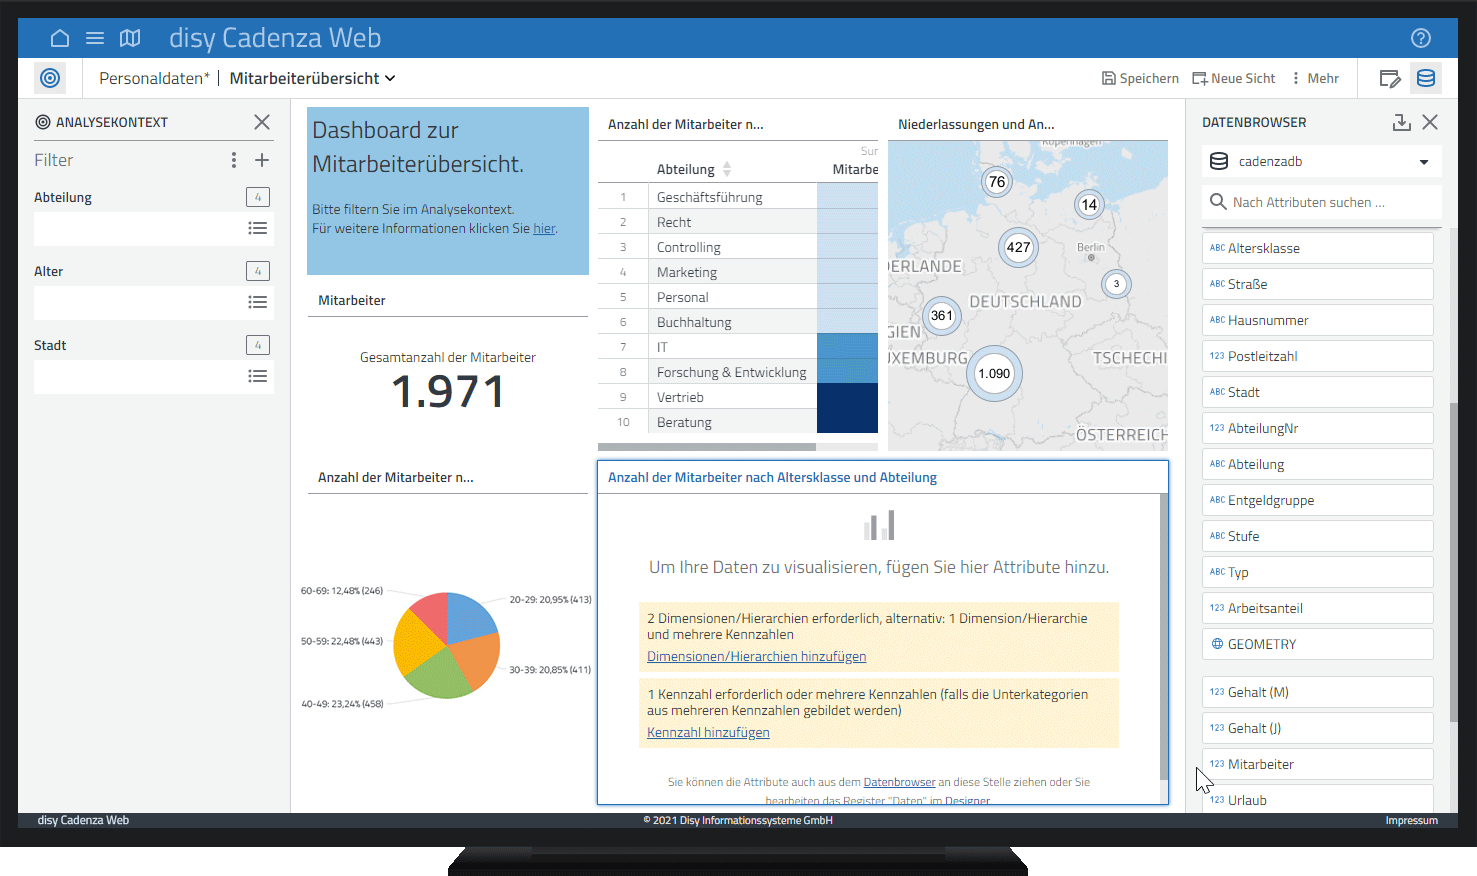 Compiling a dashboard with personnel data using the Cadenza data analysis software